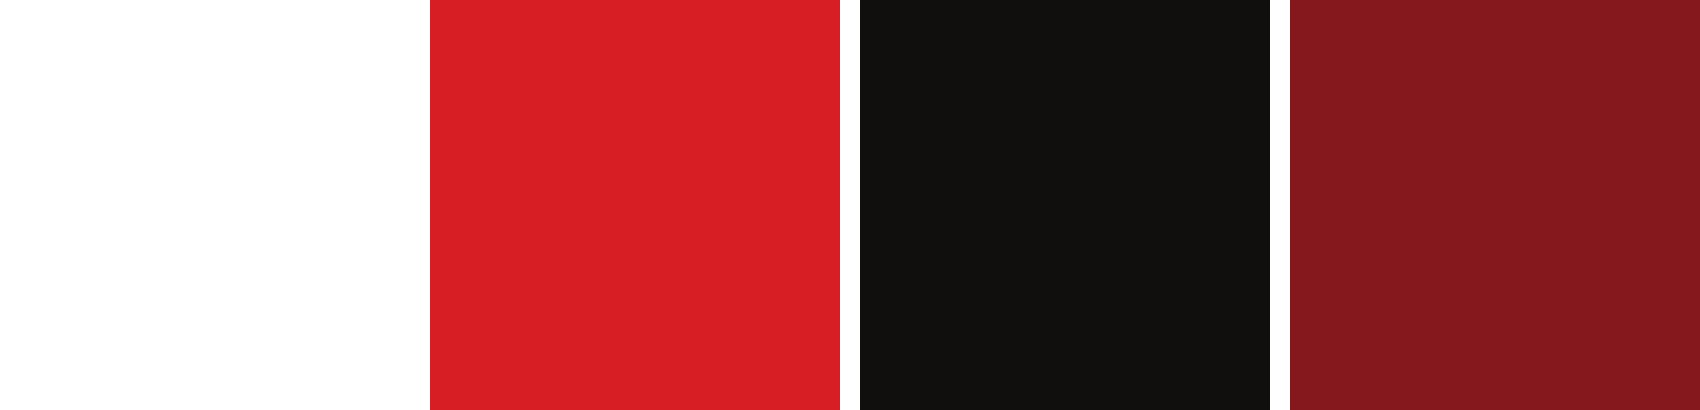 SUNY, Cortland Red Dragons Color Palette Image